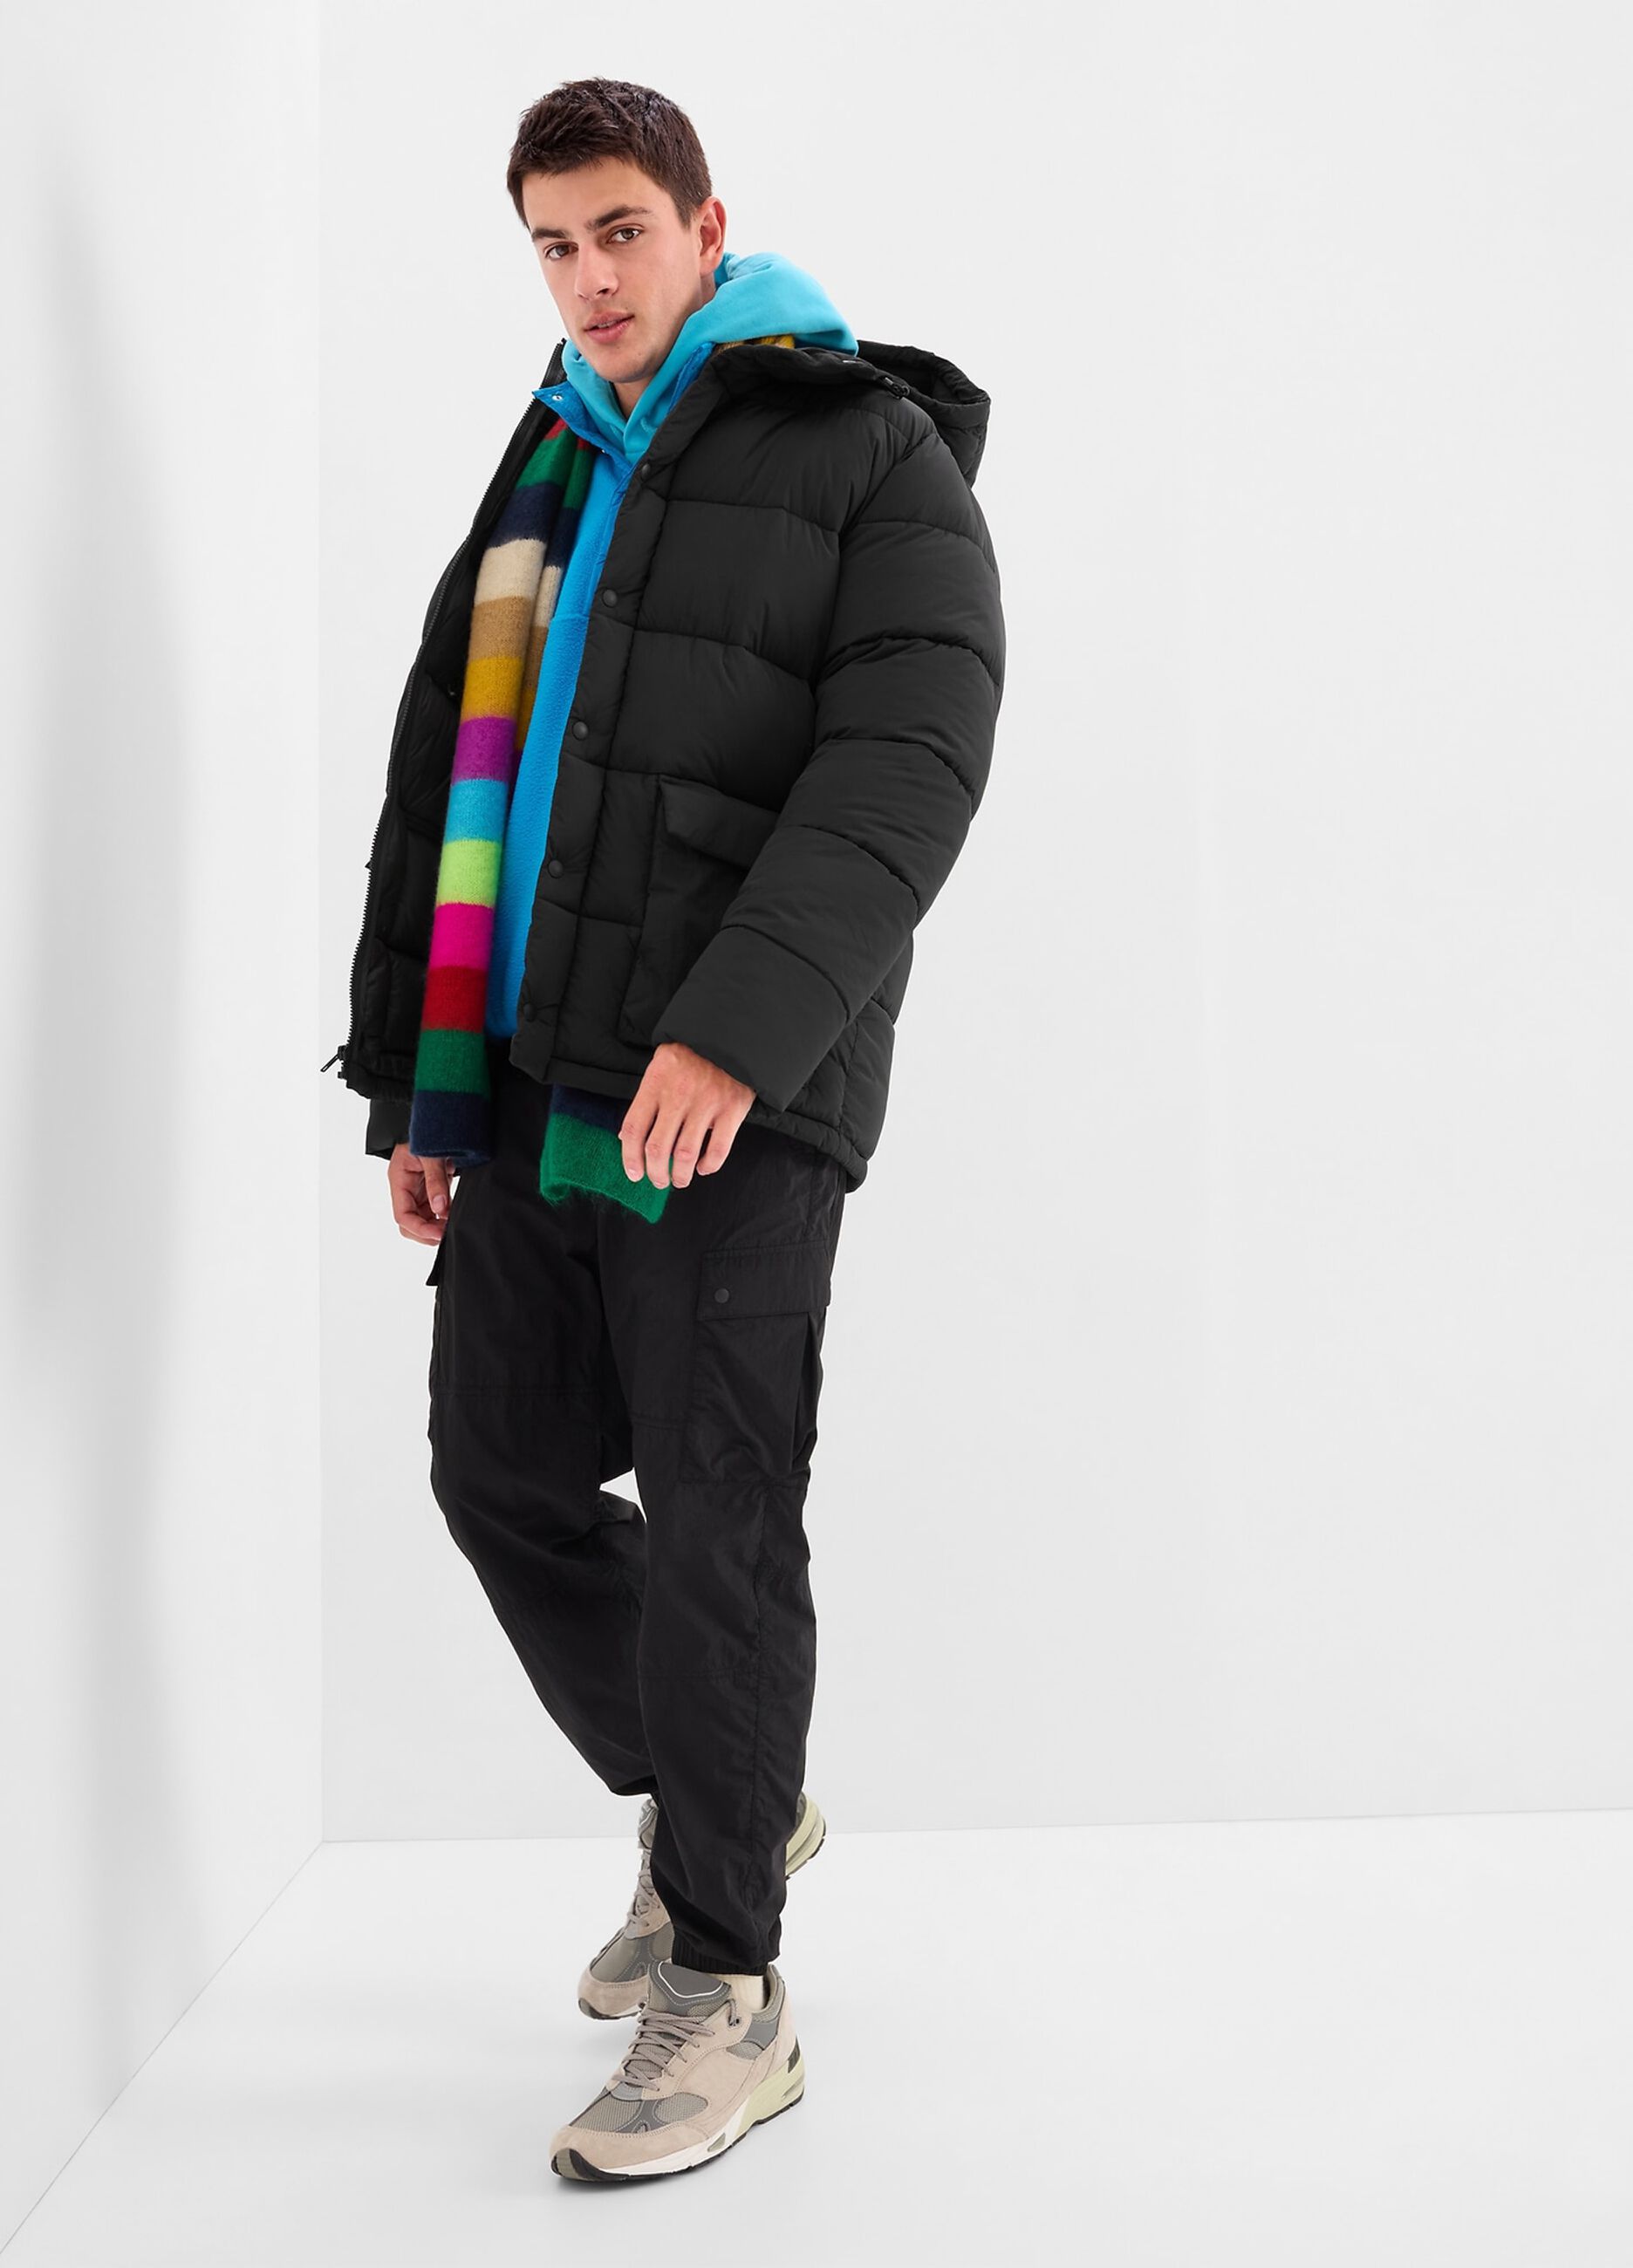 Quilted and padded jacket with hood